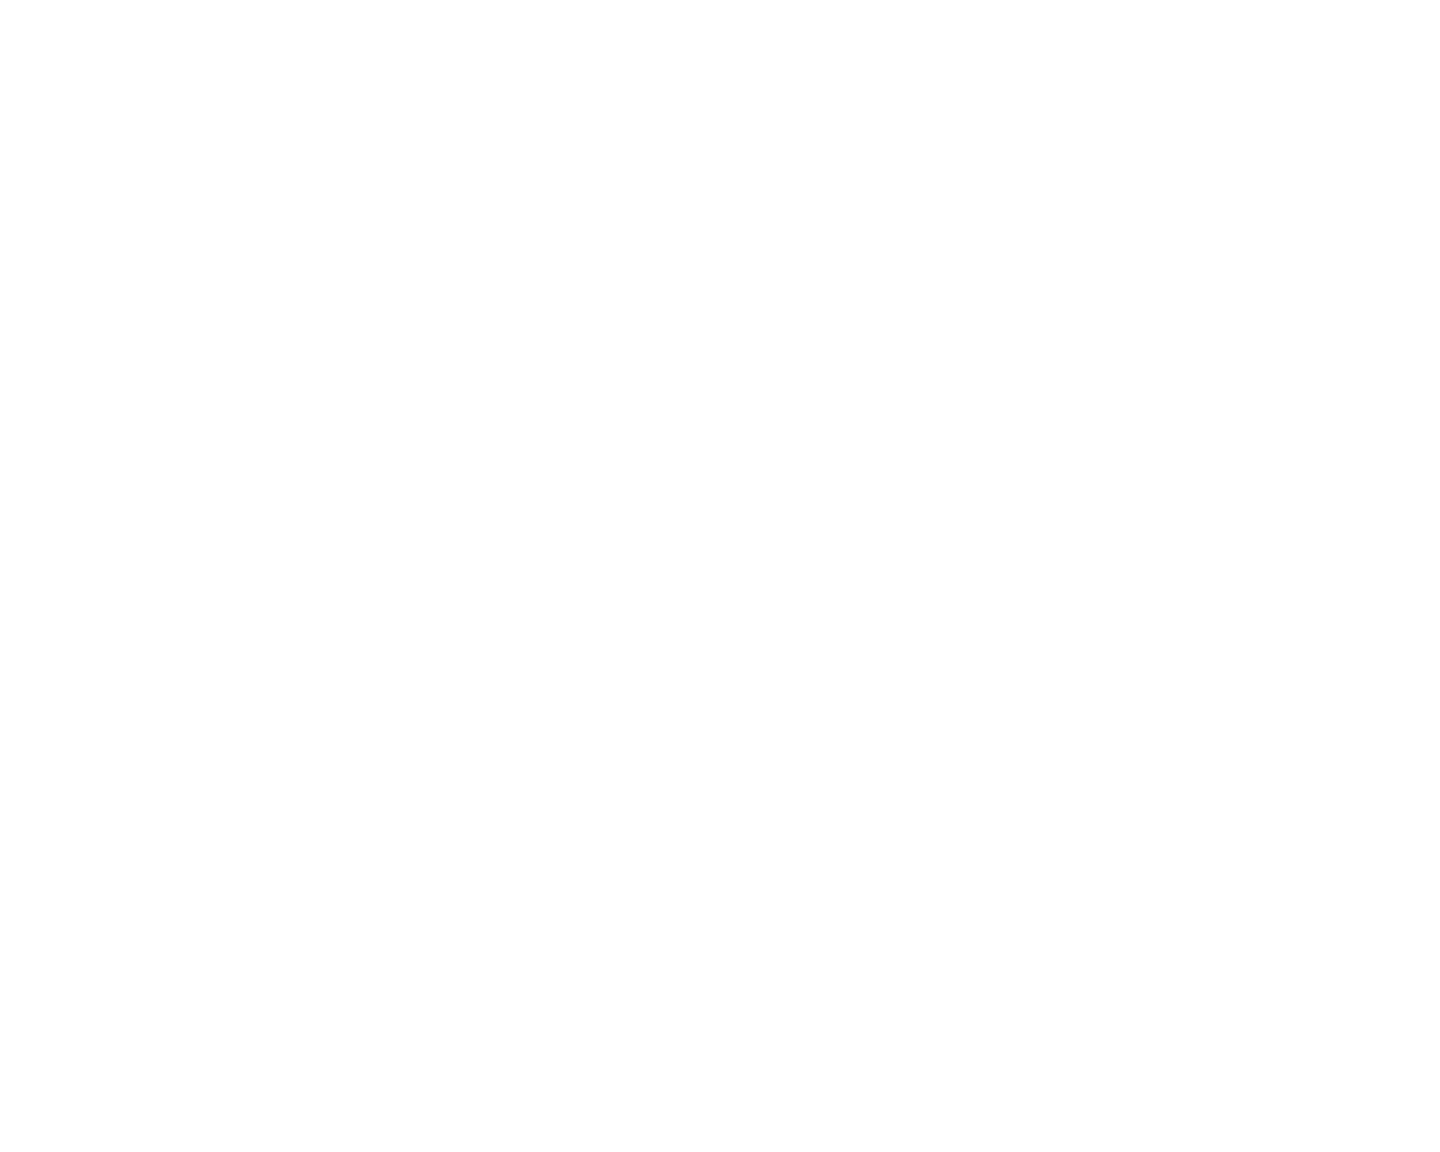 Kyrie Coaching by Ruthie Andrews